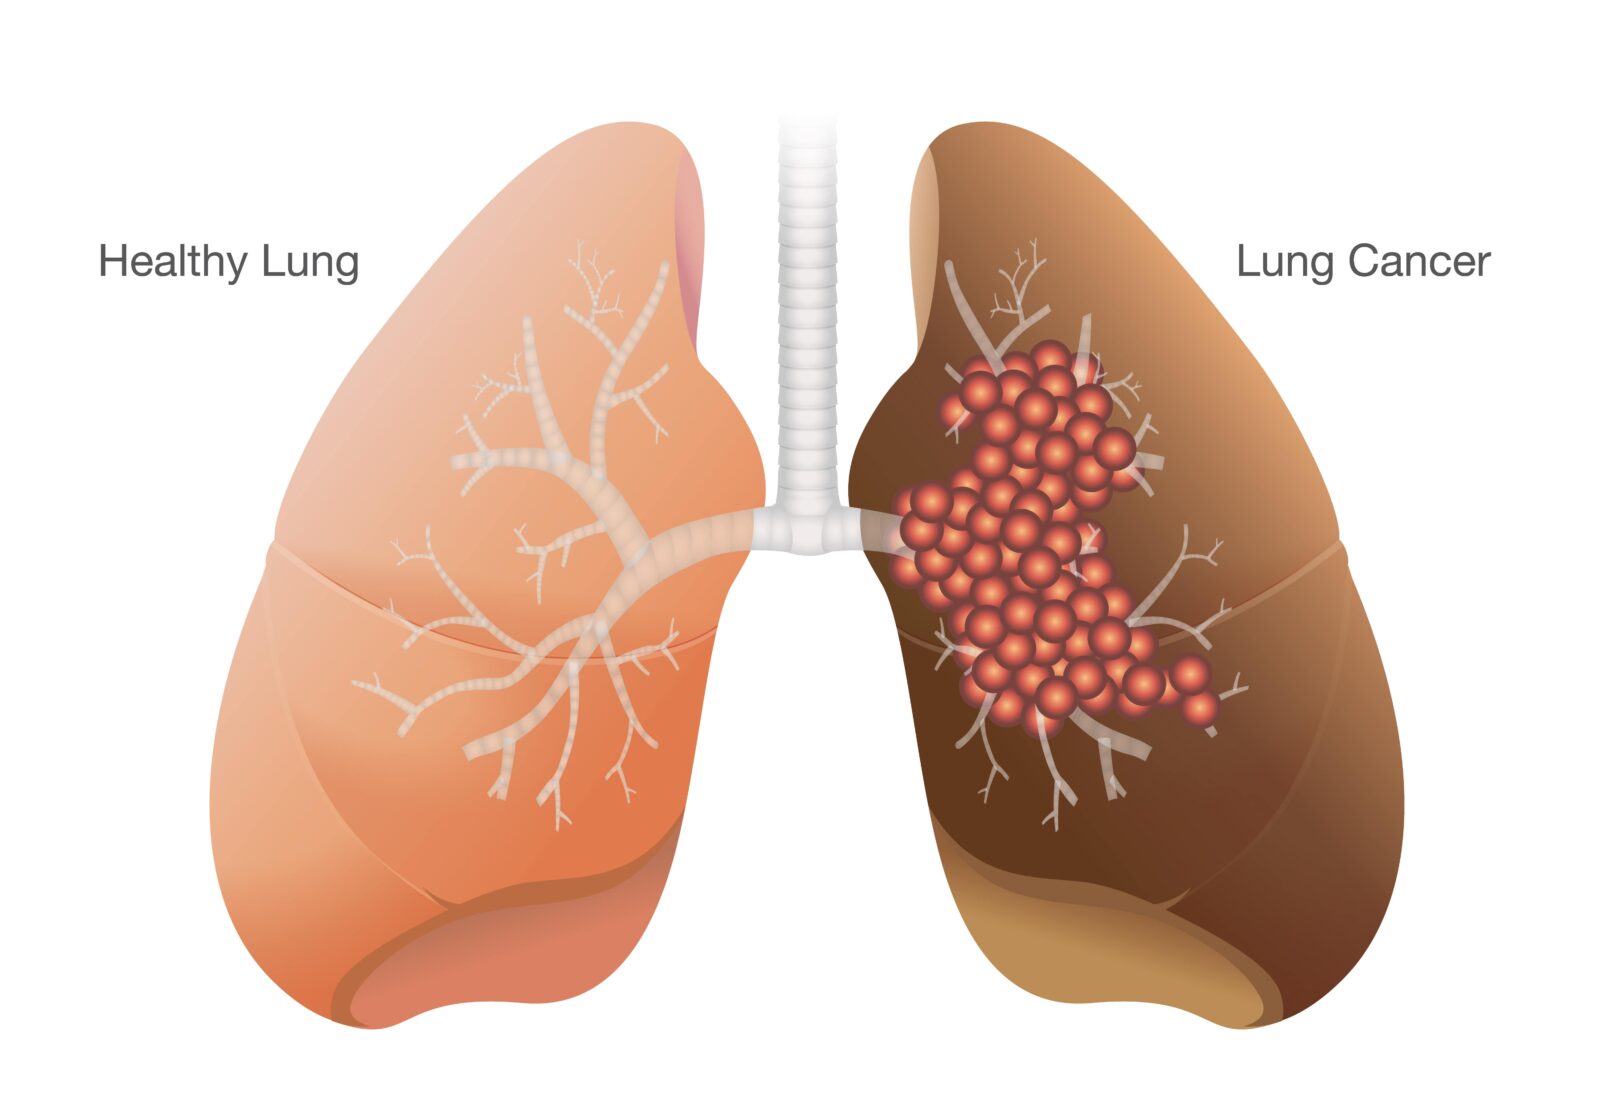 healthy vs. cancerous lung